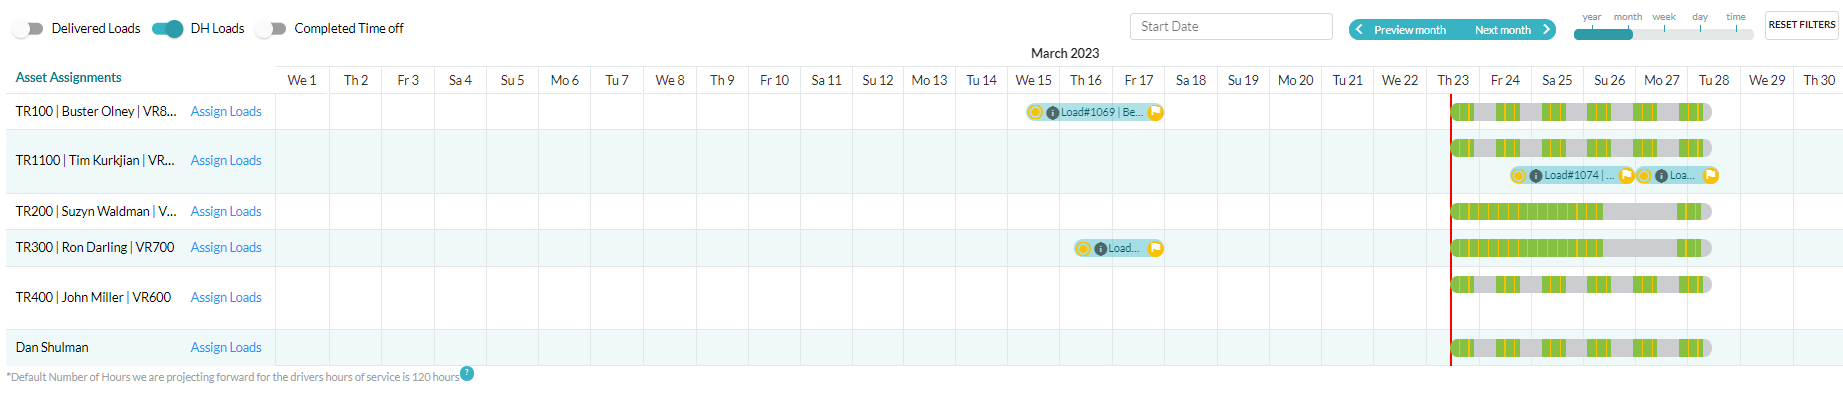 Calendar_View_Monthly_View.png